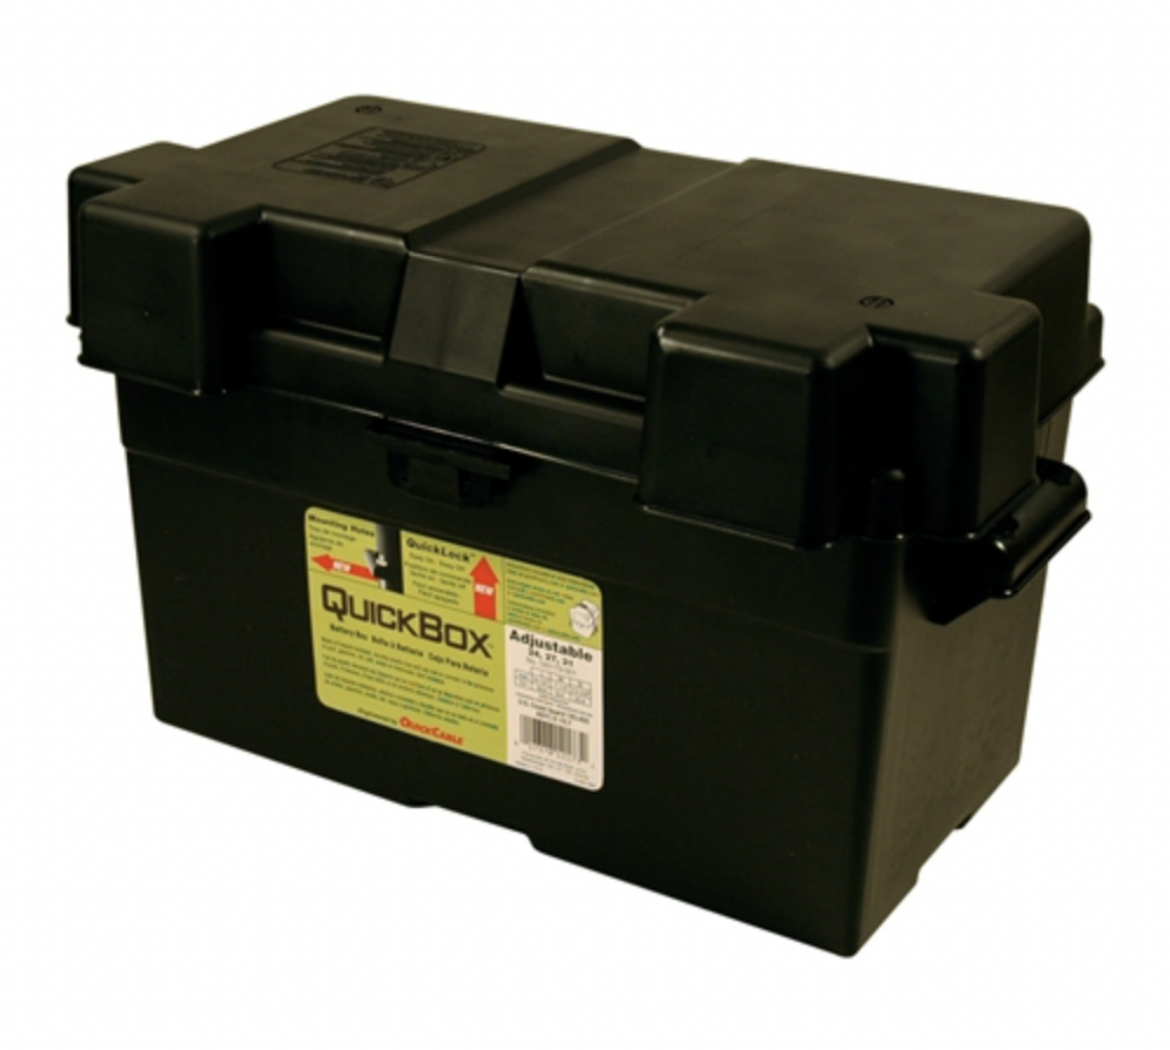 Picture of QUICKCABLE BATTERY BOX - (ADJUSTABLE GROUP 24, 27 & 31) SIZE (USA MADE)